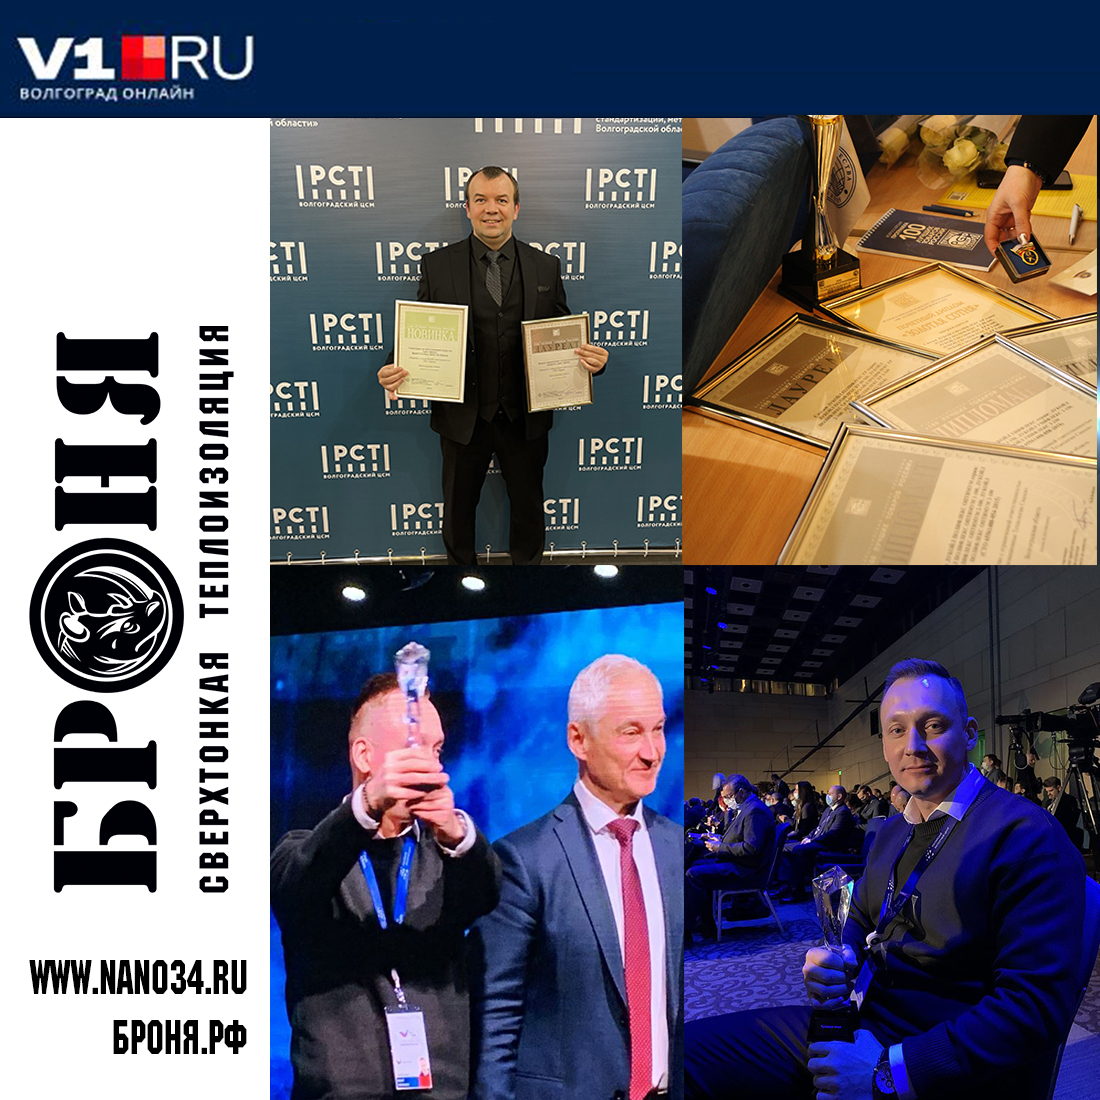 An article about the victory of Bronya at the federal competition "Made in Russia" and at the competition "100 best goods of Russia" On the news portal V1.RU